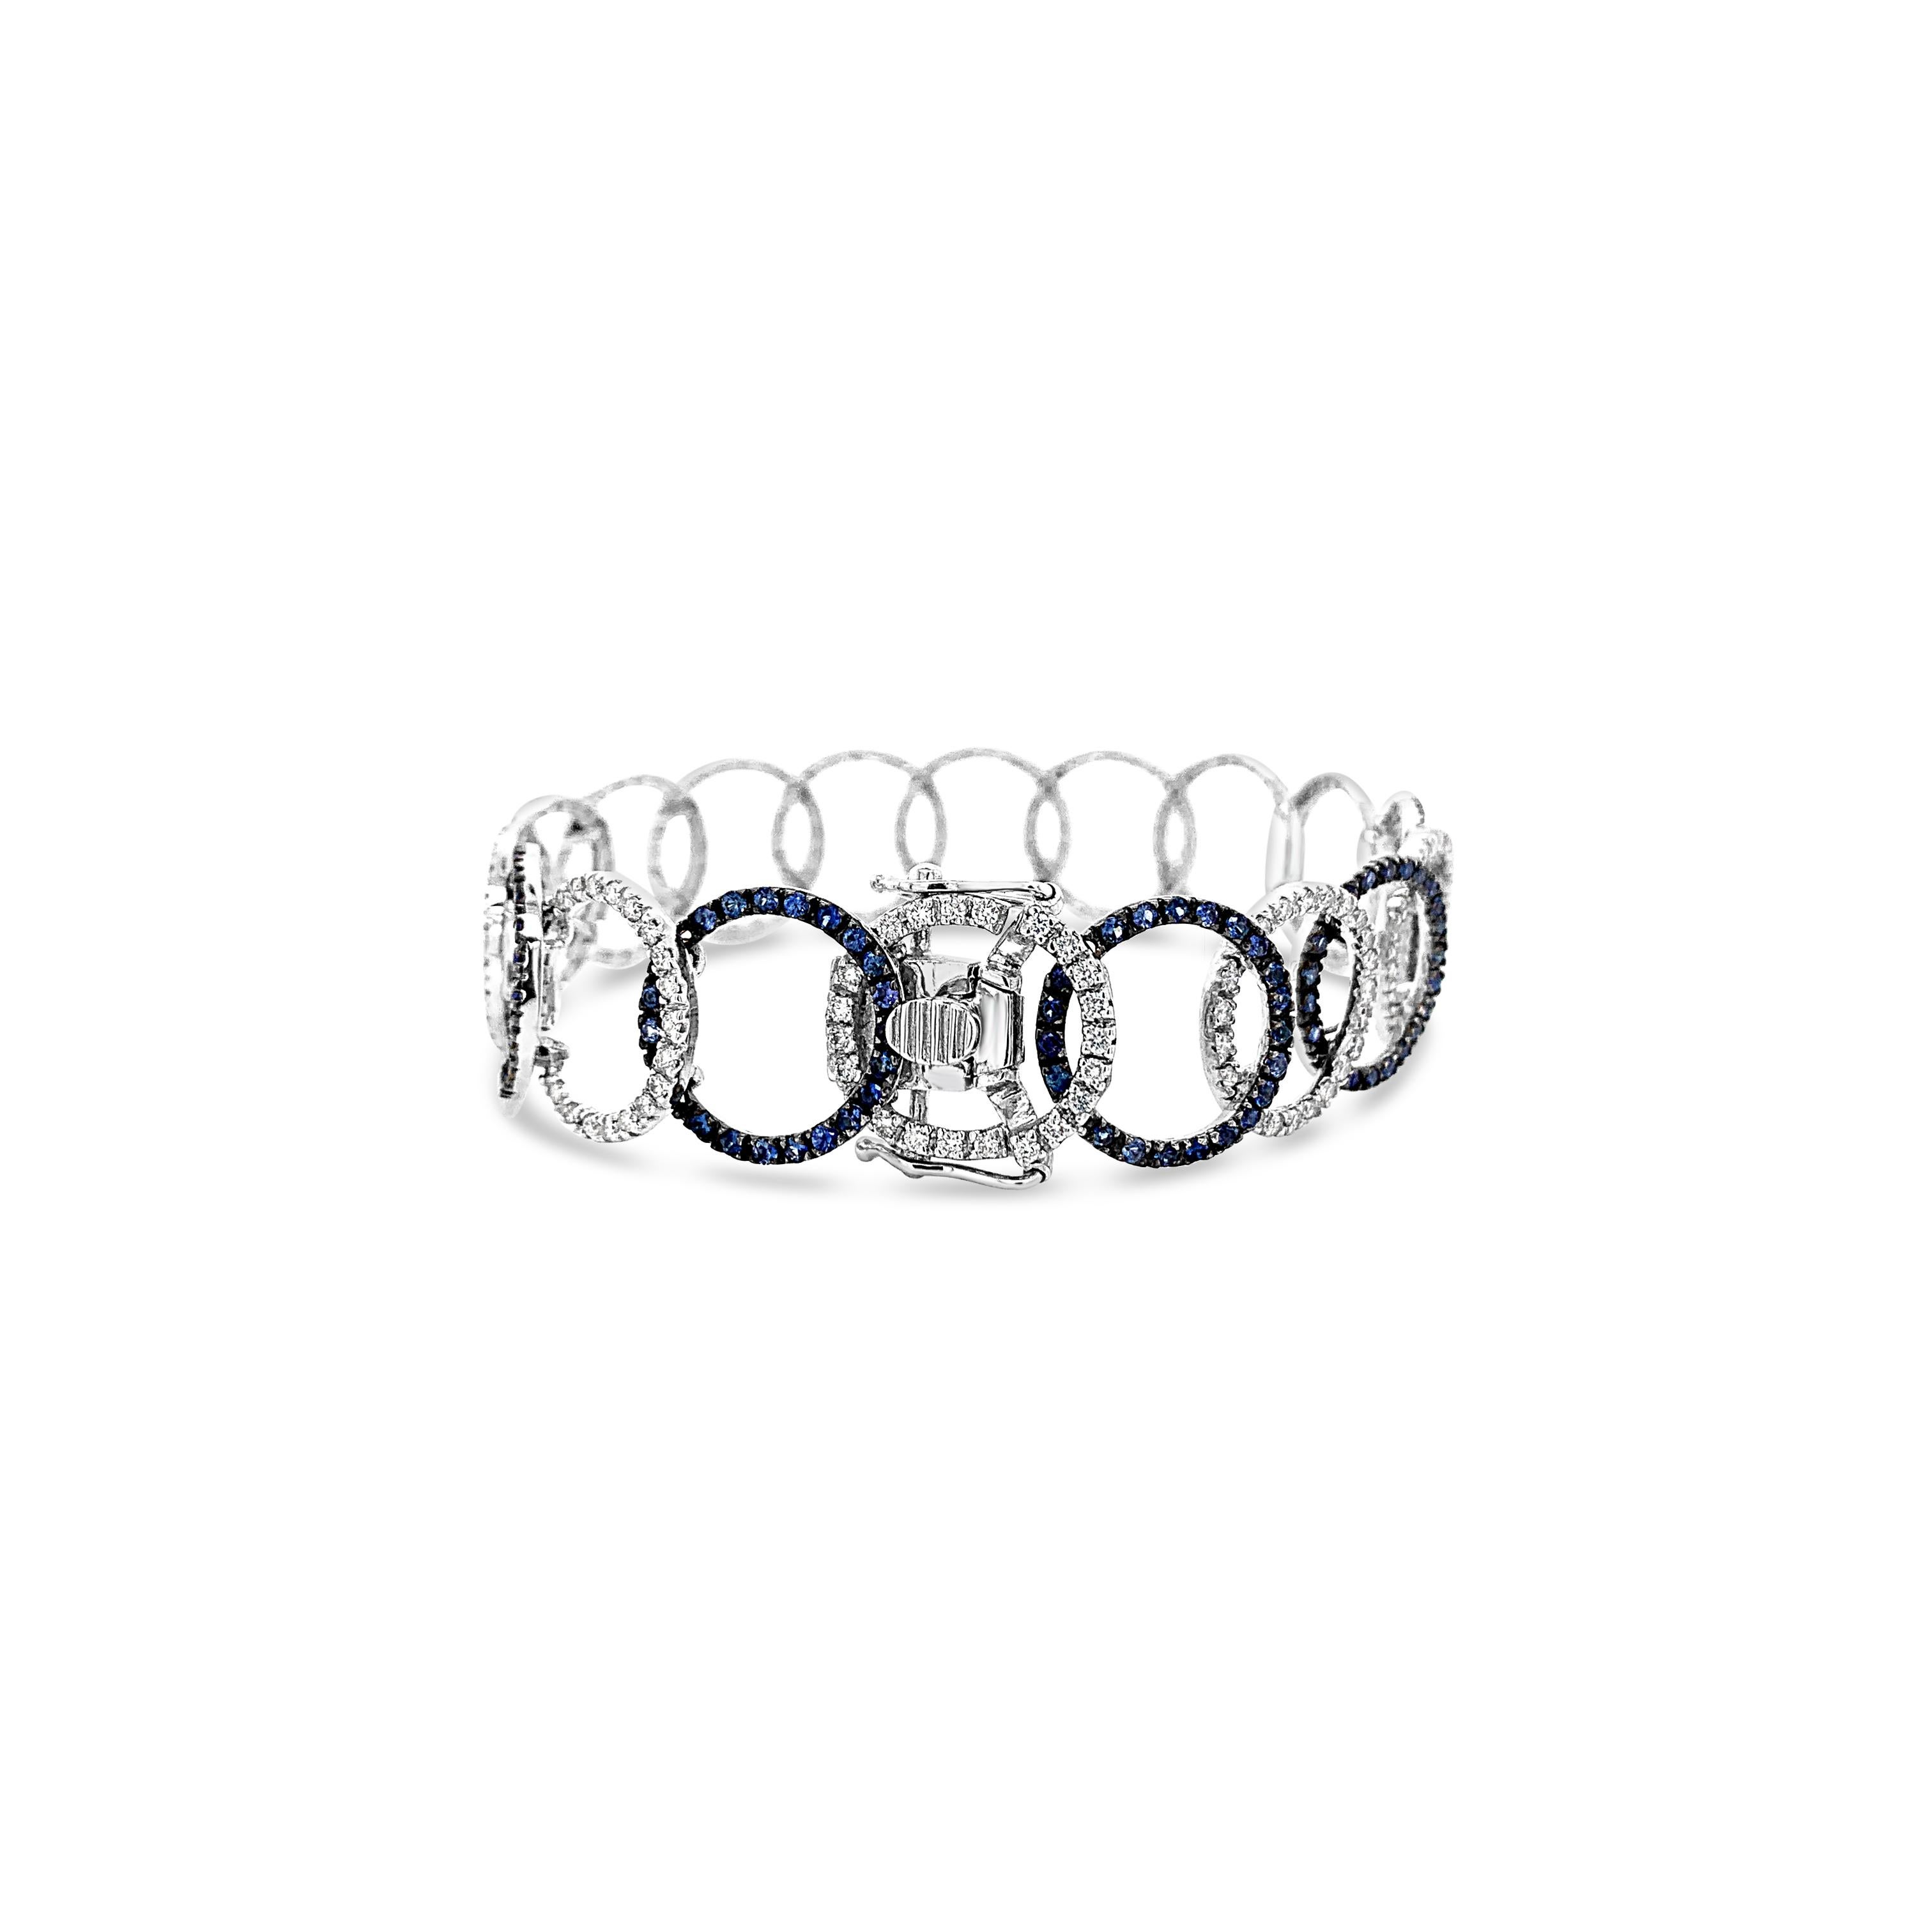 Le Vian® Bracelet featuring 2 3/8 cts. Blueberry Sapphire™, 1 5/8 cts. Vanilla Diamonds® set in 14K Vanilla Gold®

Item comes with a Le Vian® jewelry box as well as a Le Vian® suede pouch!